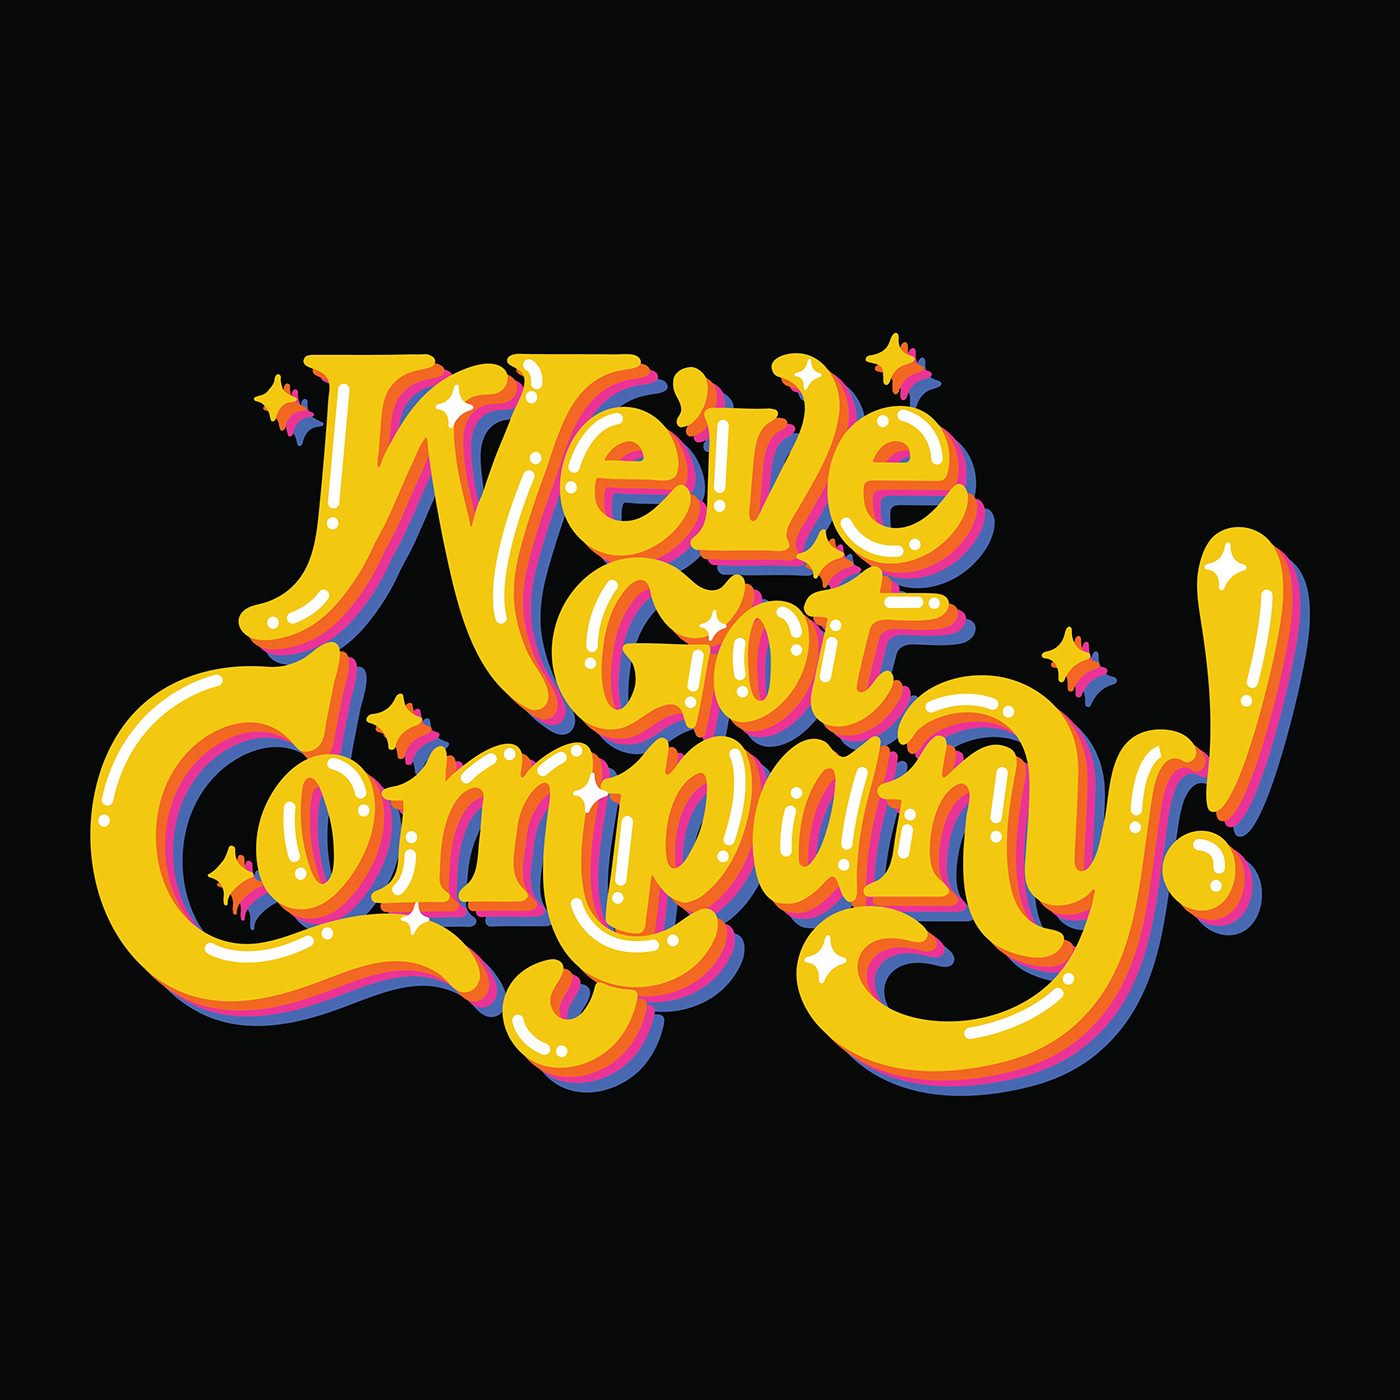 amazon music amazonmusic Comedy show film title lettering tv show tv title design Twitch typography   we've got company